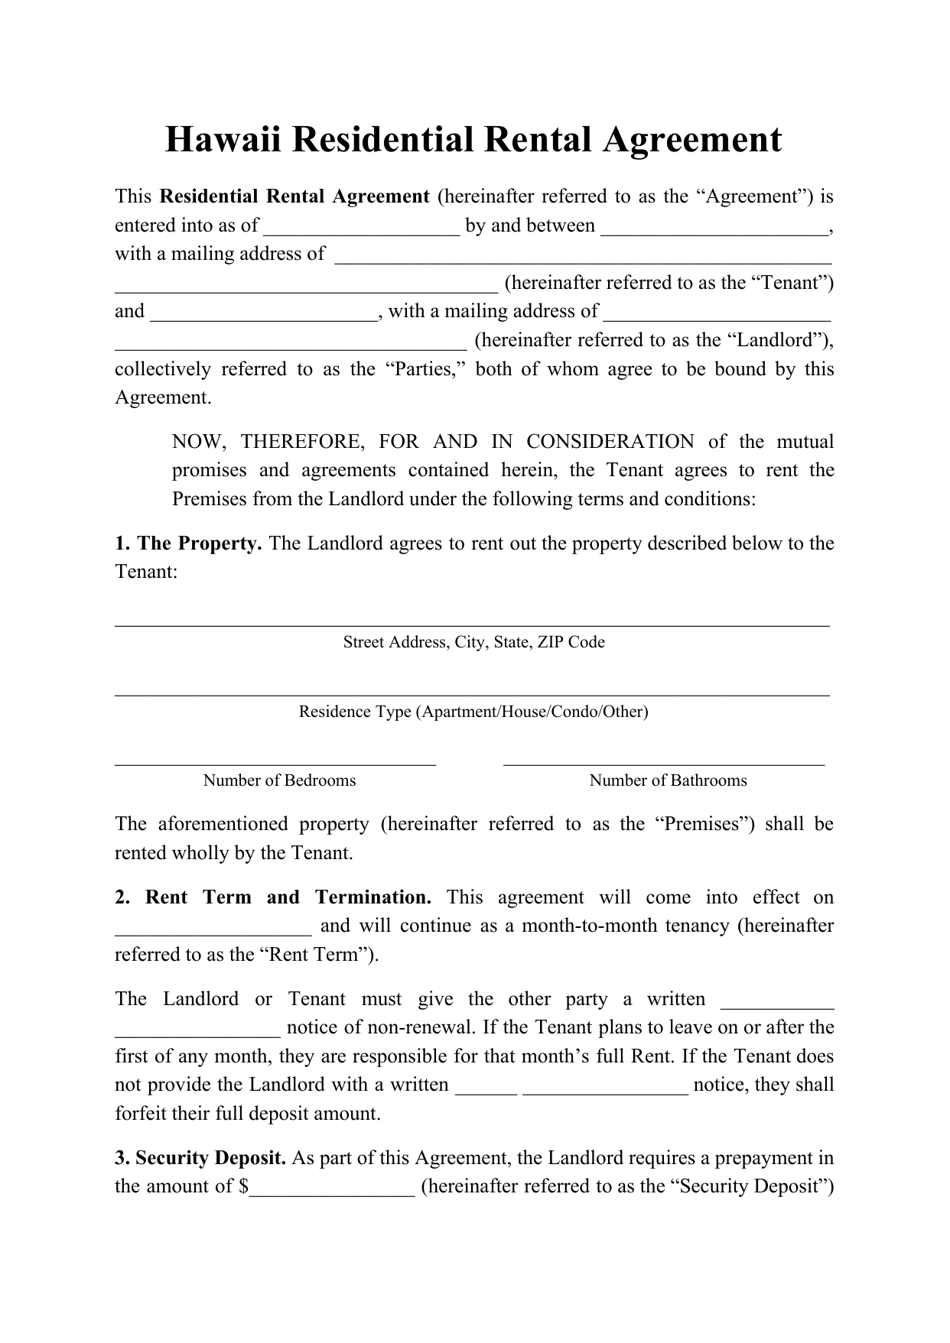 Hawaii Residential Rental Agreement Template Fill Out Sign Online